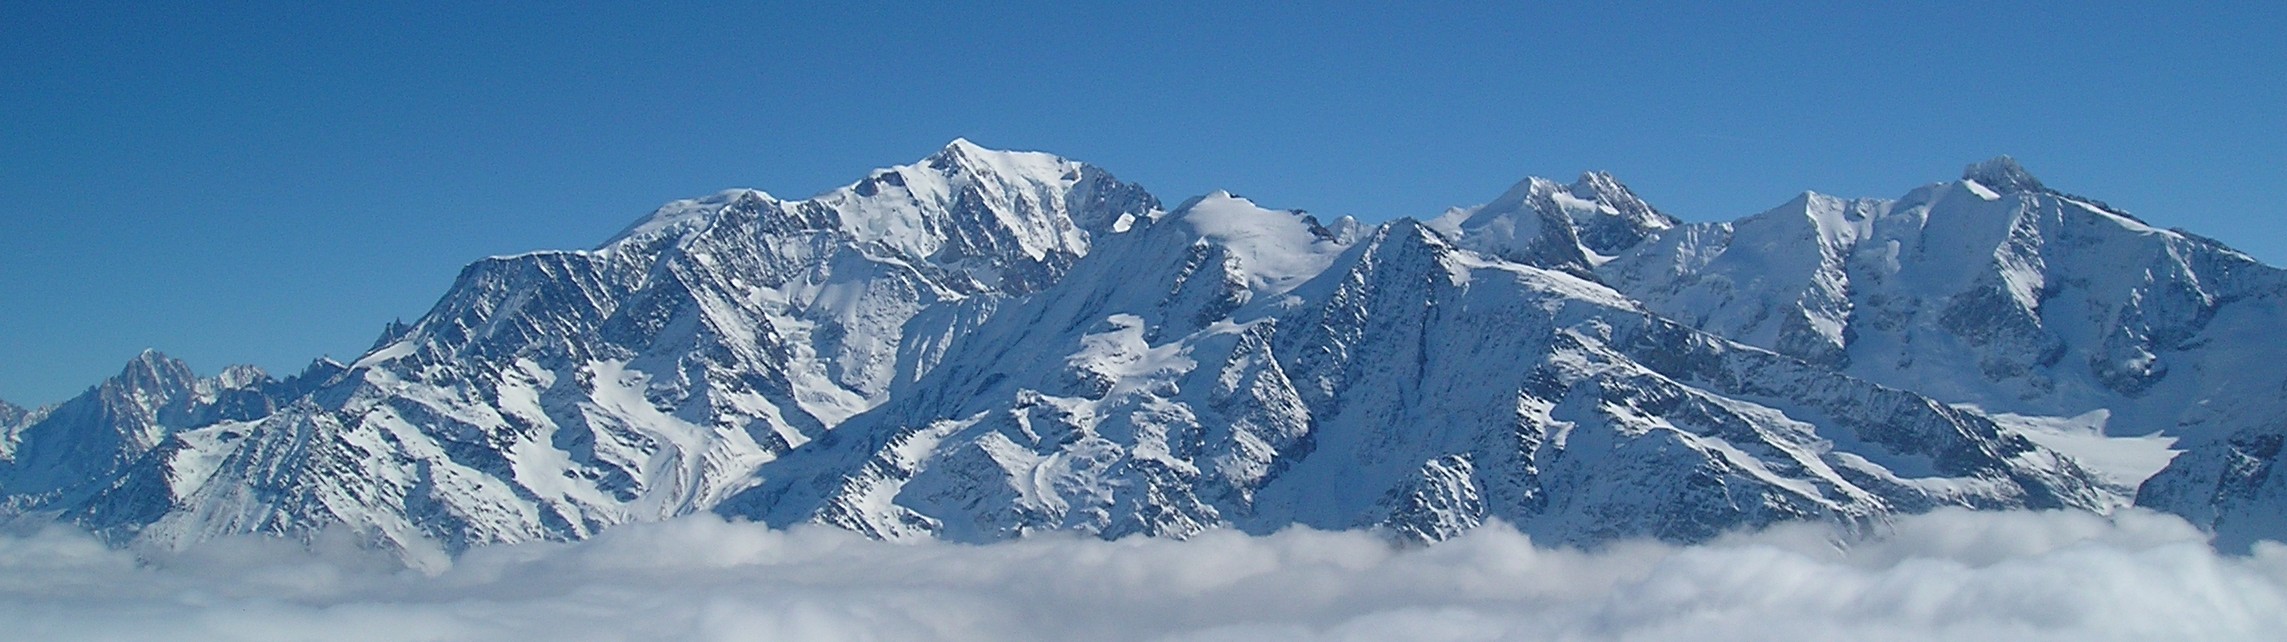 http://fr.academic.ru/pictures/frwiki/77/Massif_du_Mont-Blanc_(hiver_panoramique).jpg